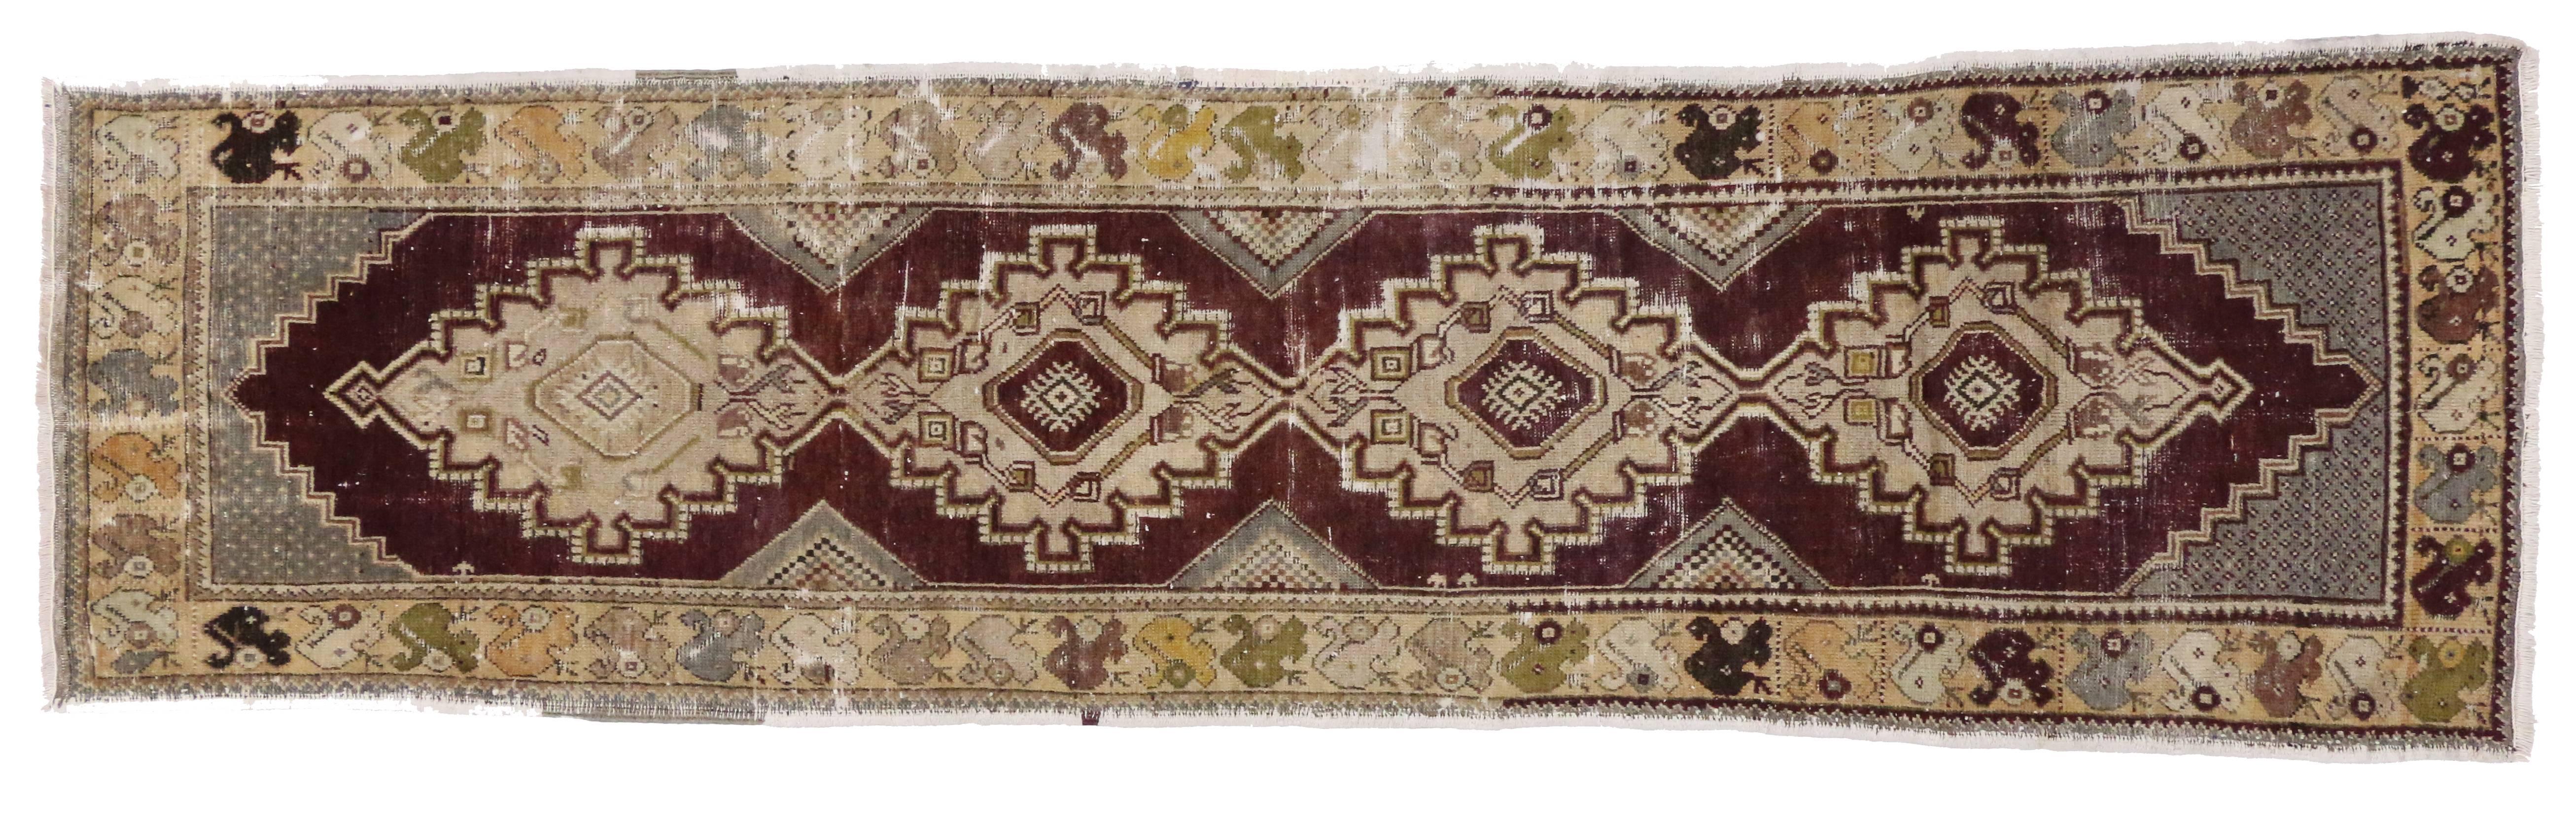 51228 a vintage Oushak rug runner. This classic Oushak runner is patterned in a geometric Primitive style. The Oushak runner features four connected beige medallions centred with a symbol of the 'evil eye' for protection. Slate gray spandrels and